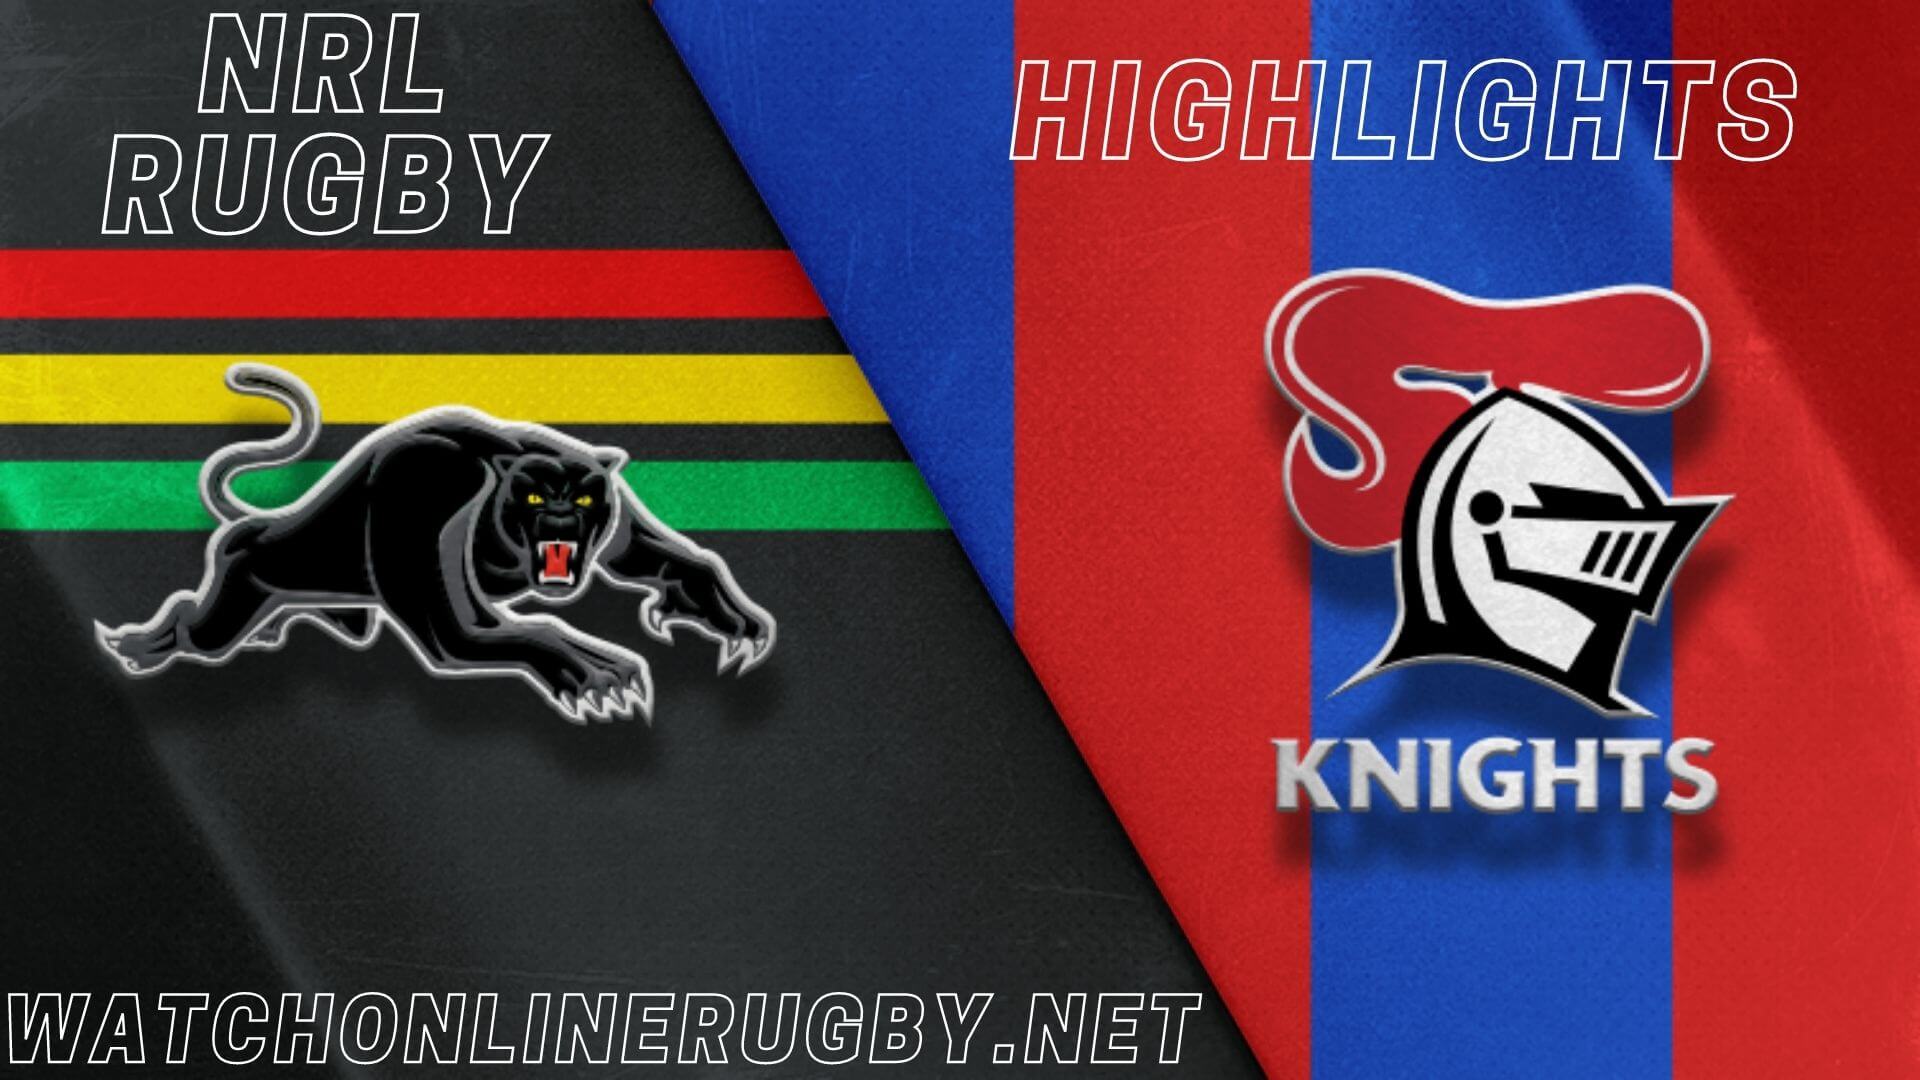 Panthers Vs Knights Highlights RD 3 NRL Rugby